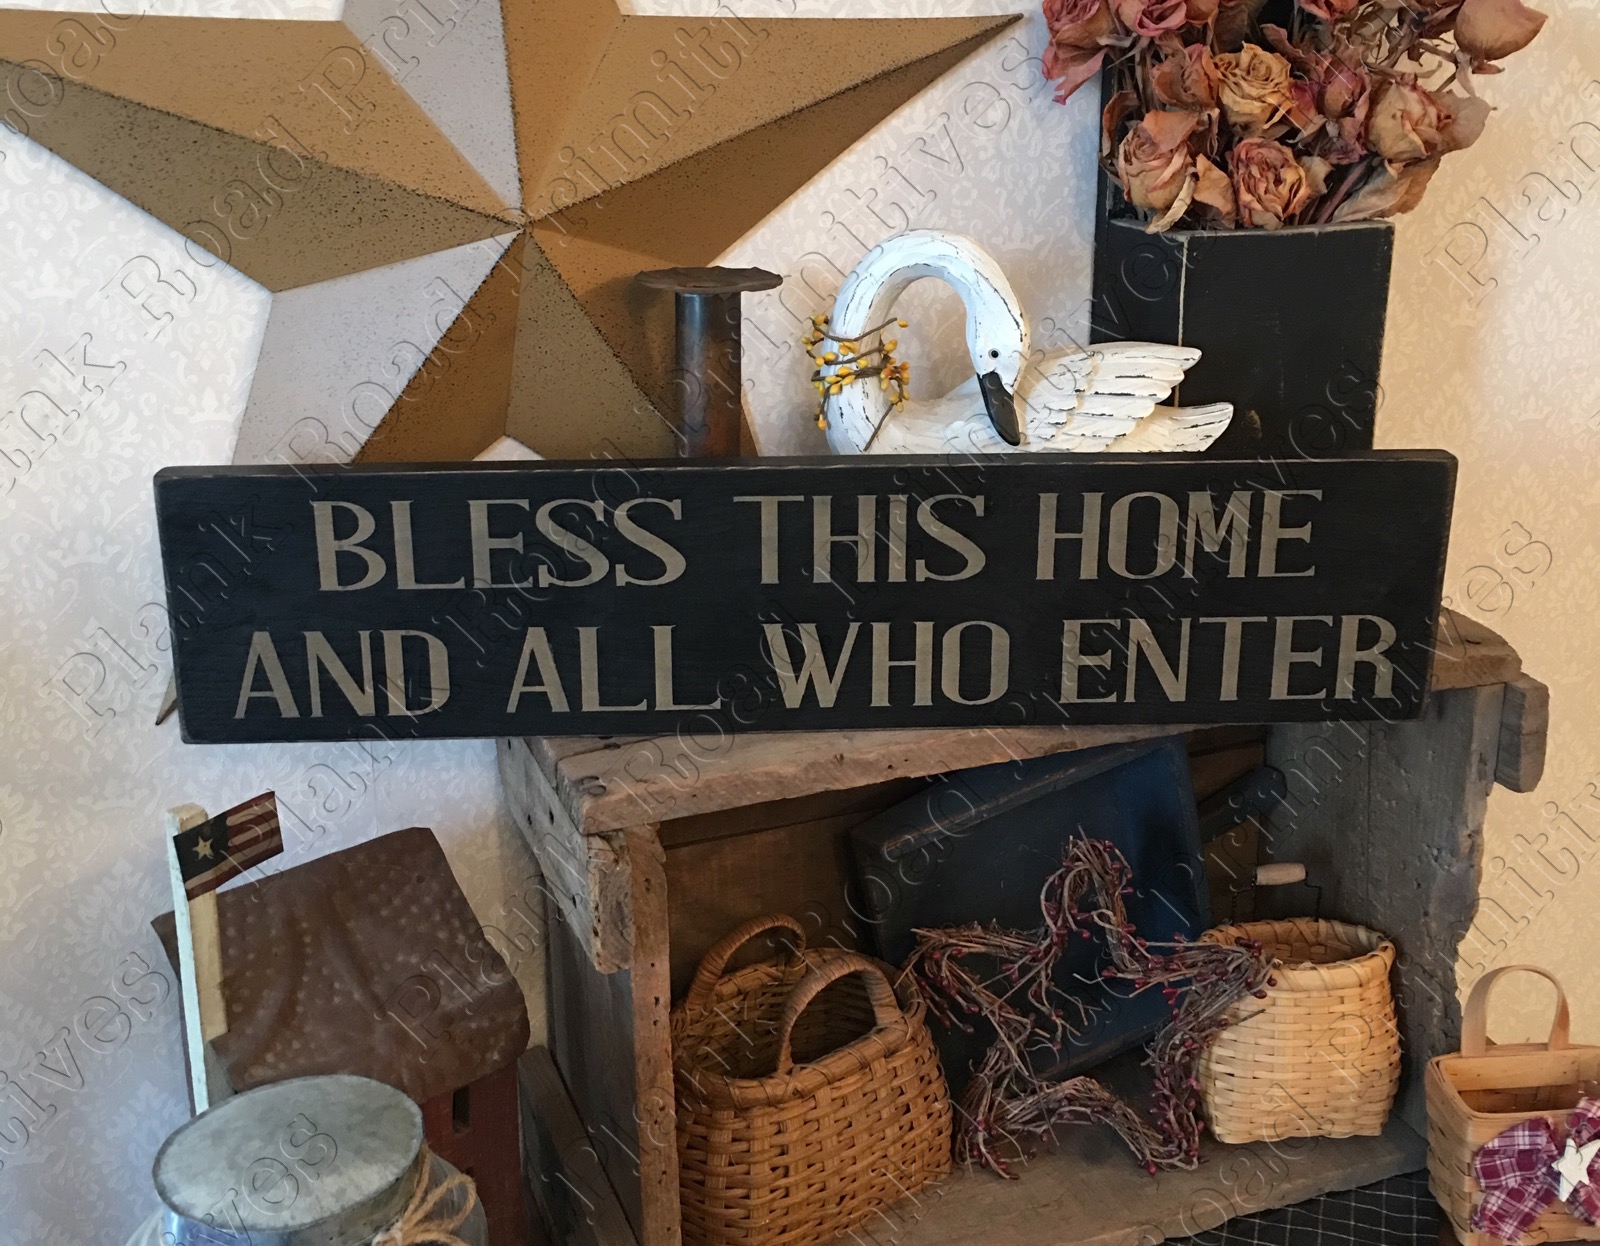 Bless This Home And All Who Enter - 24"x5.5"